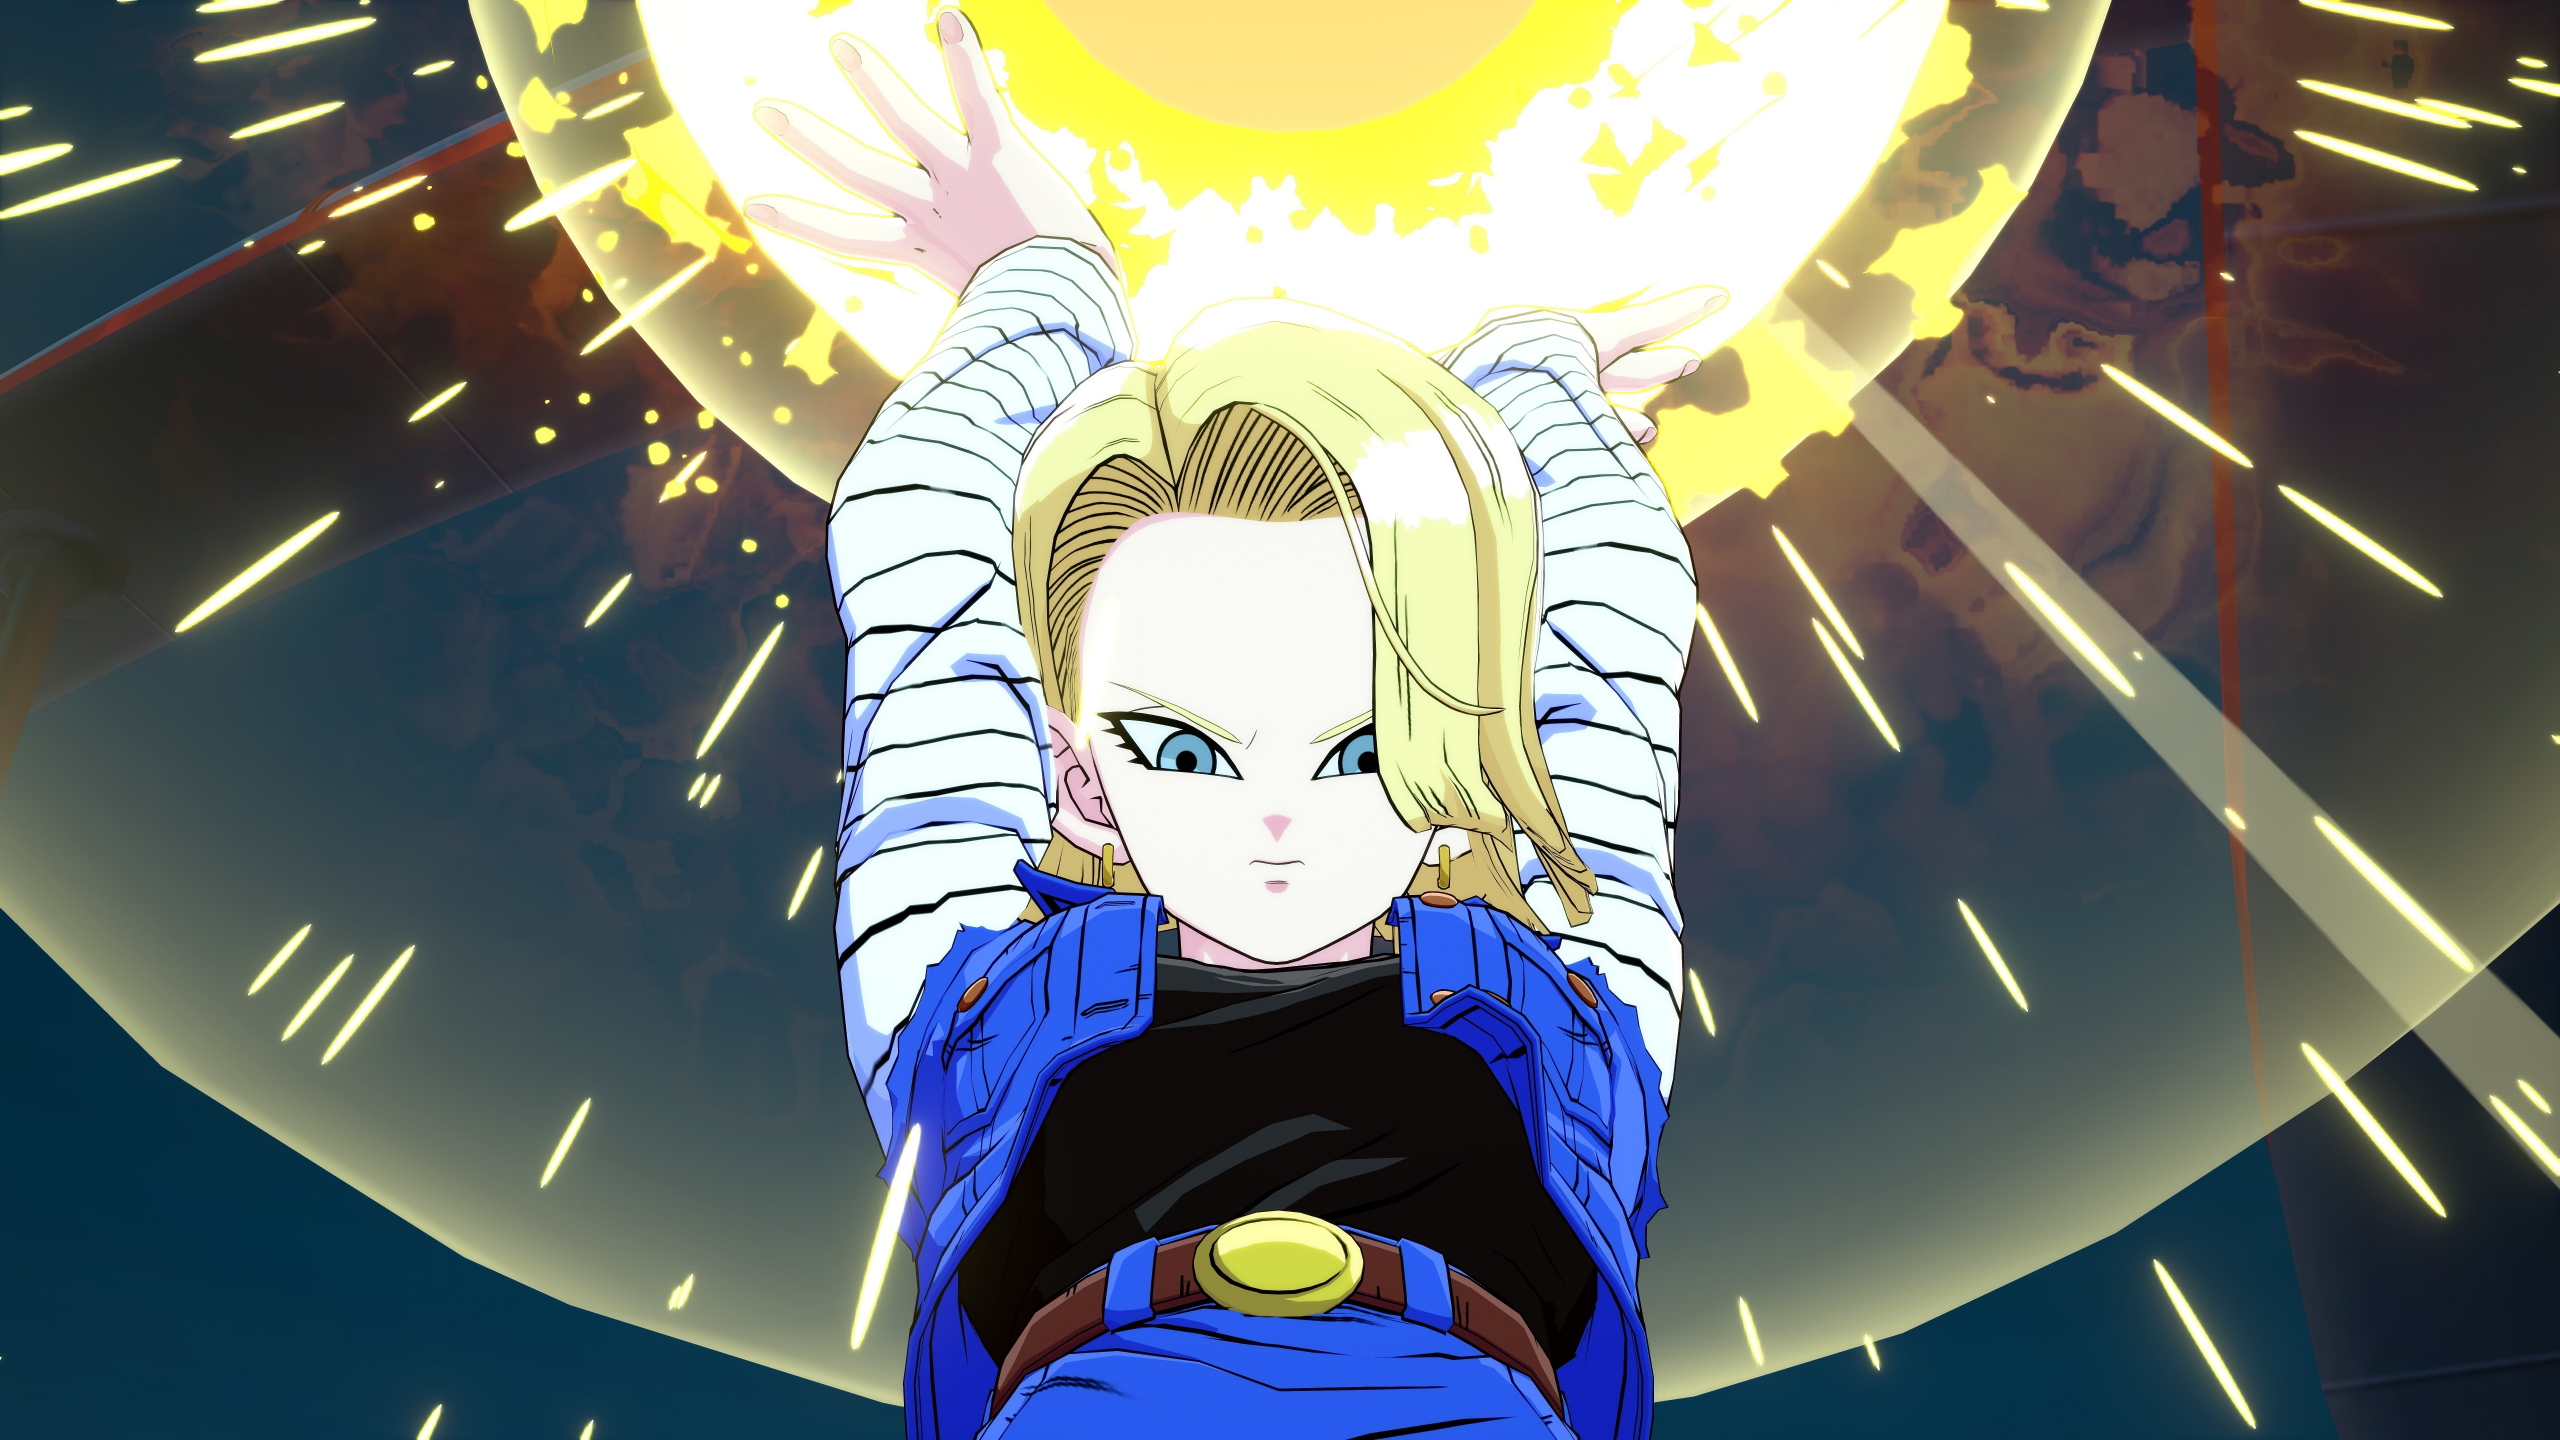 Download 2560x1440 Wallpaper Android 18 Dragon Ball Fighterz Anime Girl Dual Wide Widescreen 16 9 Widescreen 2560x1440 Hd Image Background 4697